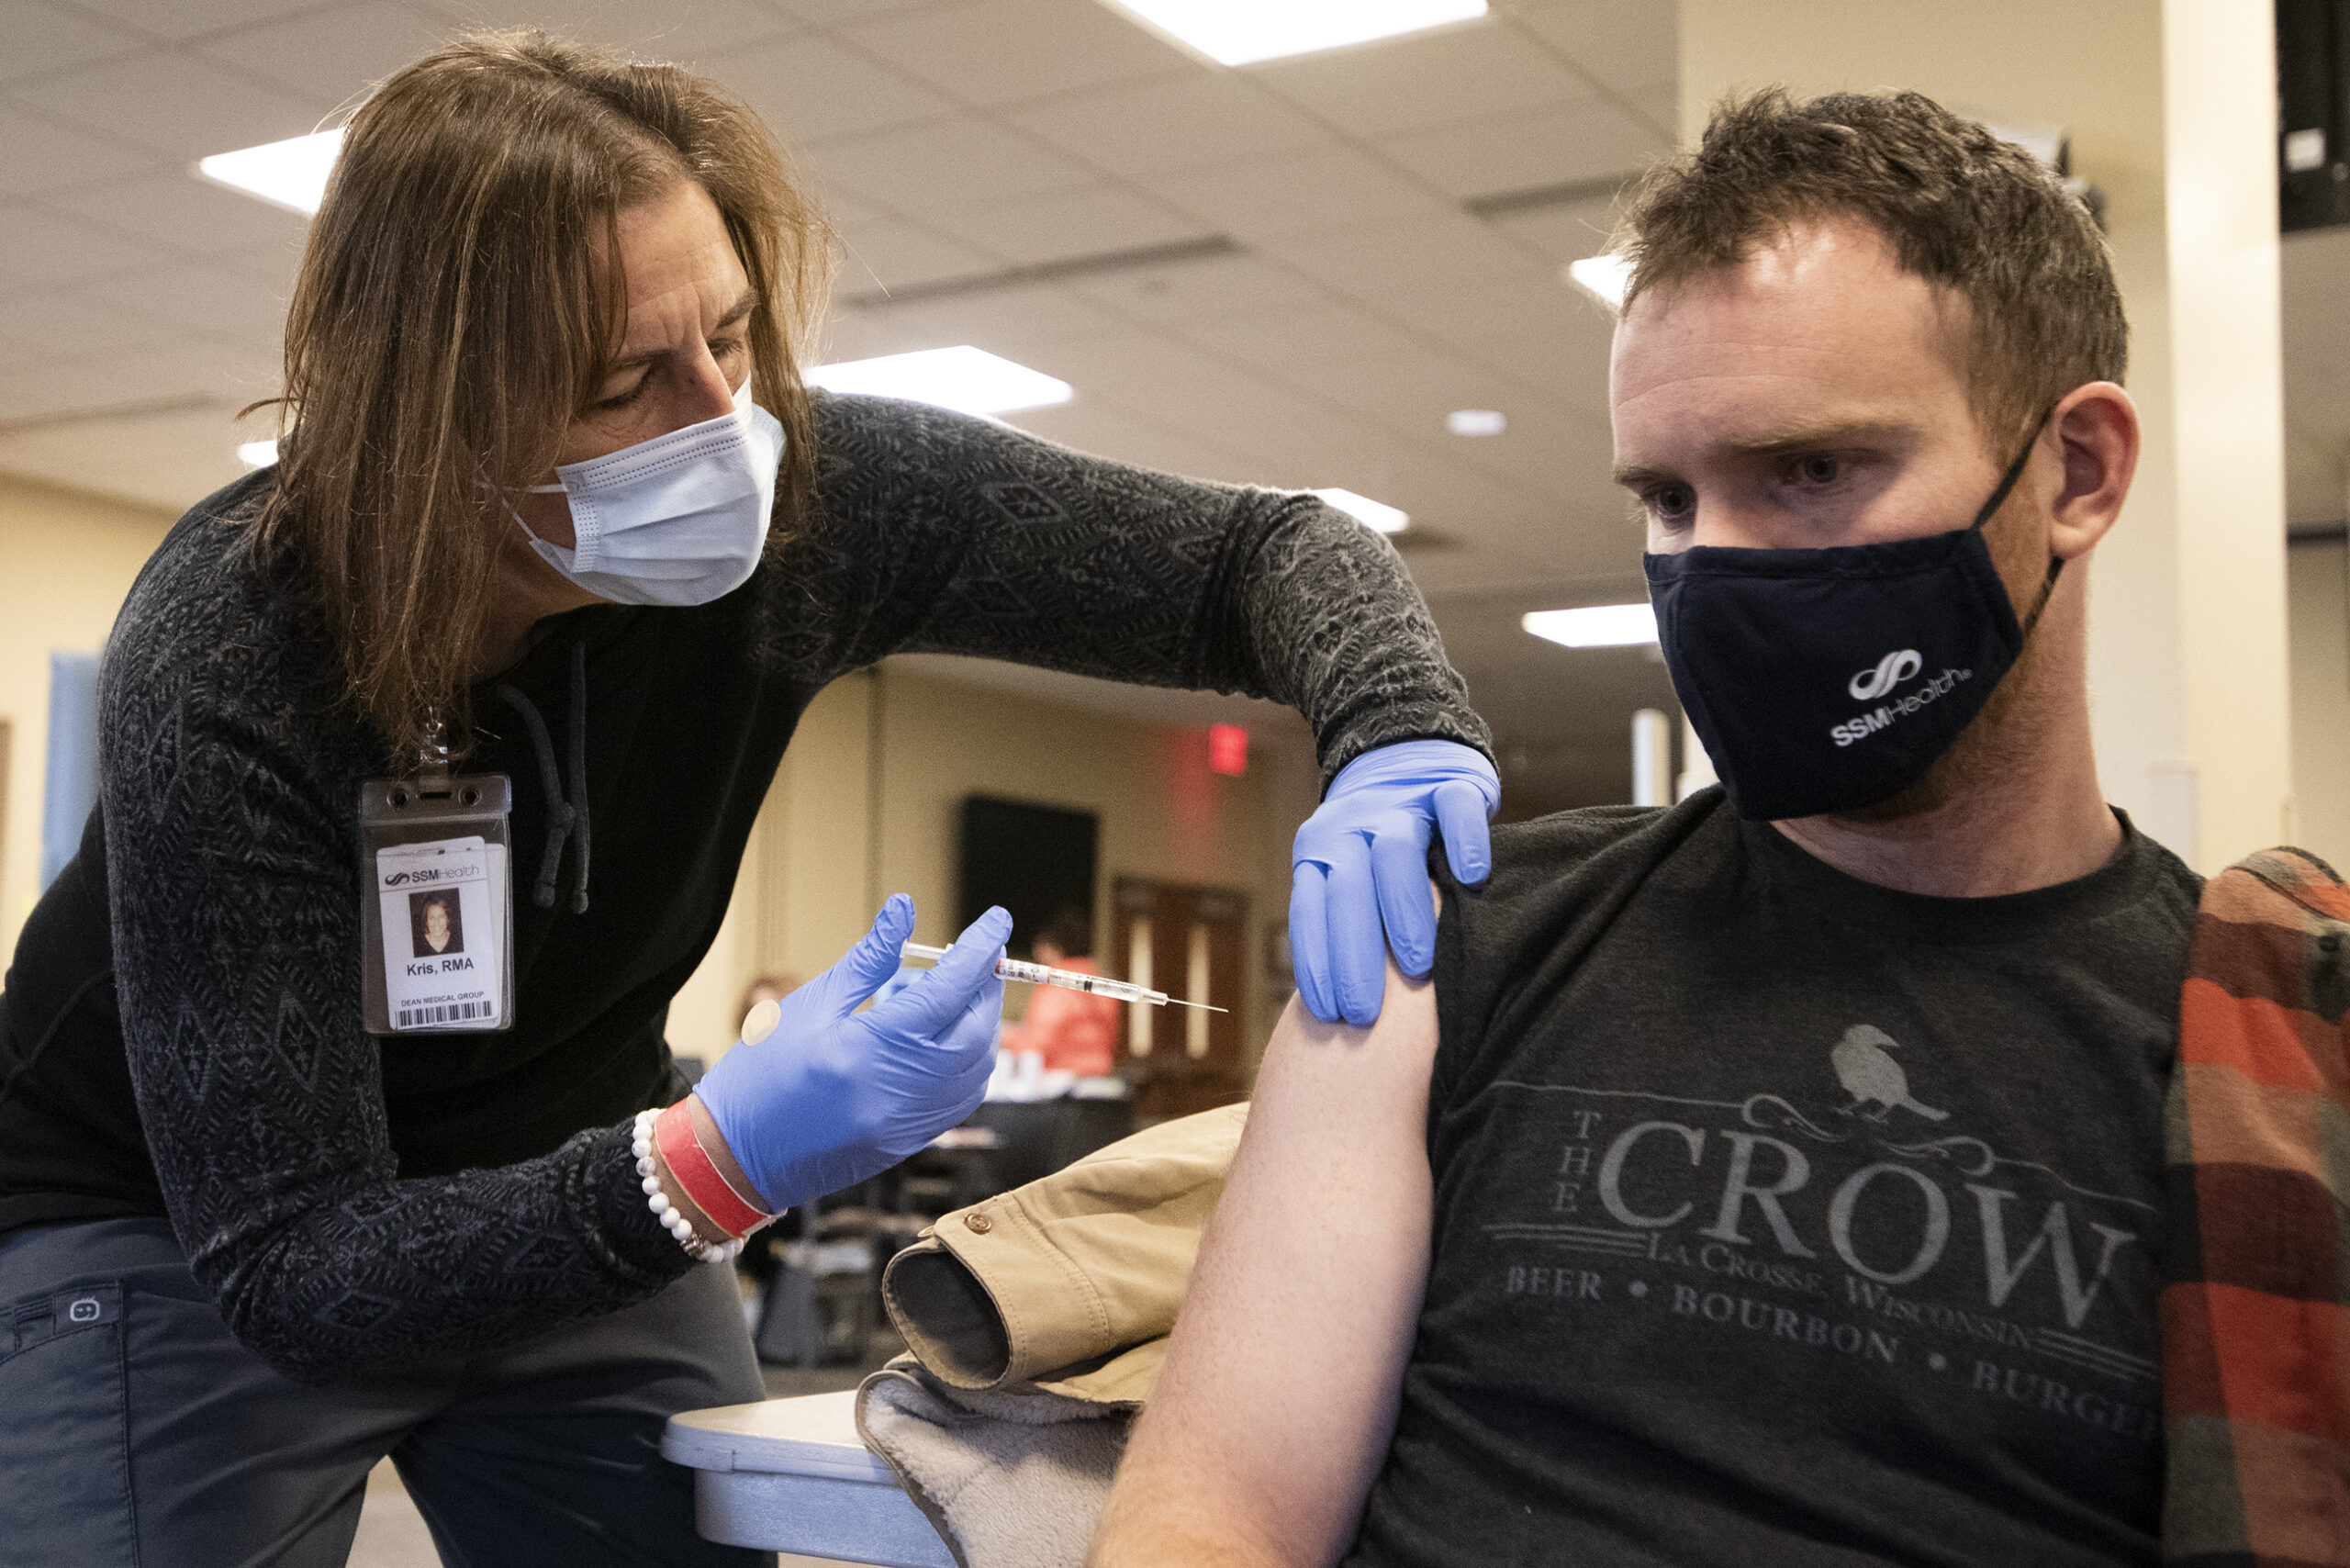 A nurse wears blue gloves as she gives a vaccine to a man with rolled up sleeves